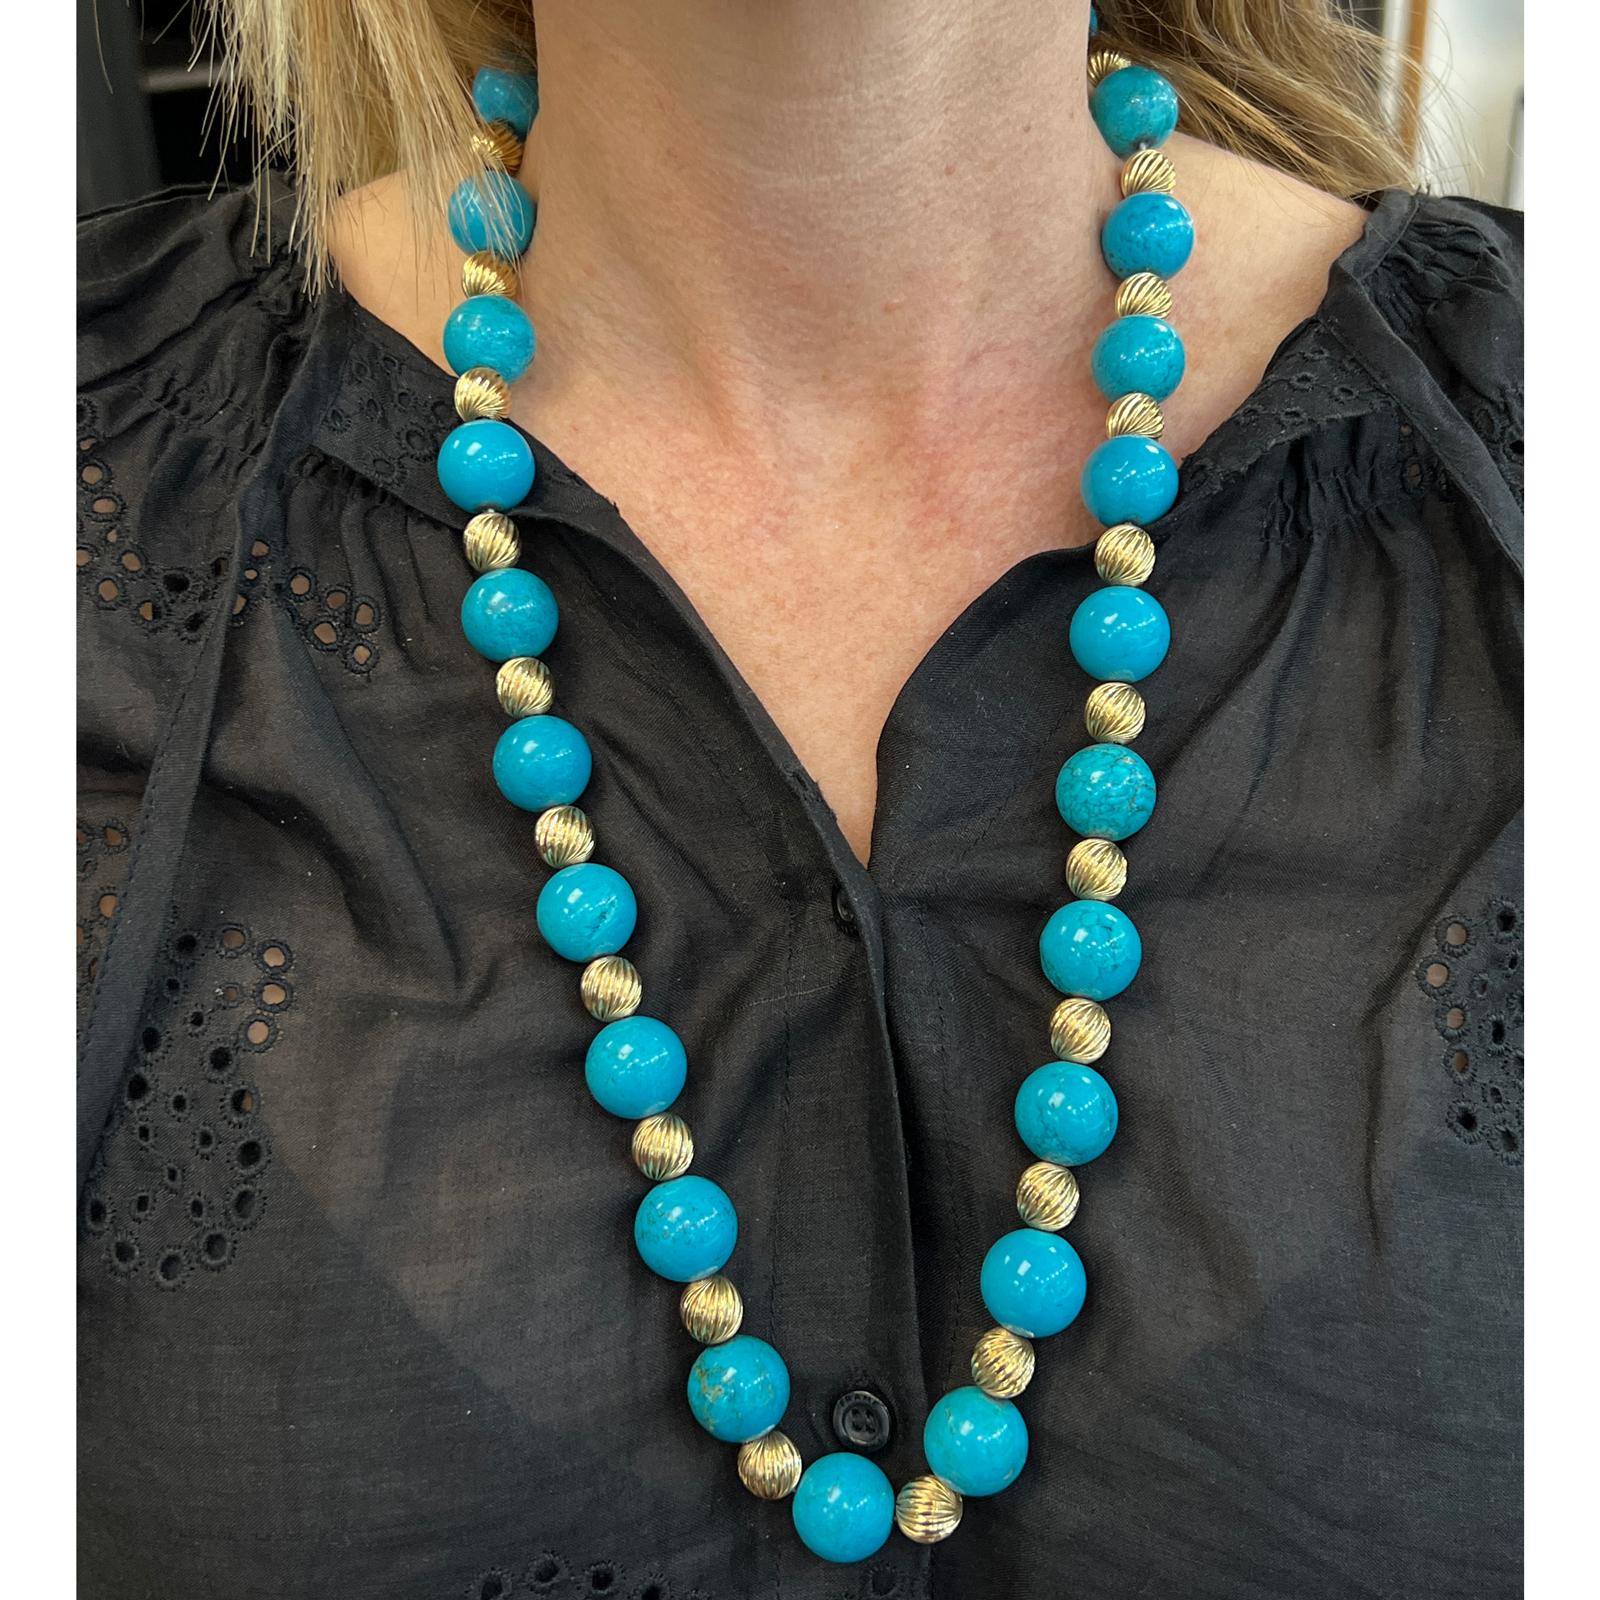 Fabulous turquoise and 14 karat yellow gold bead necklace desgined by Tiffany & Co. The necklace features 16mm natural turquoise beads alternating with gold balls. The necklace measures 26 inches in length, and features Tiffany's signature X gold